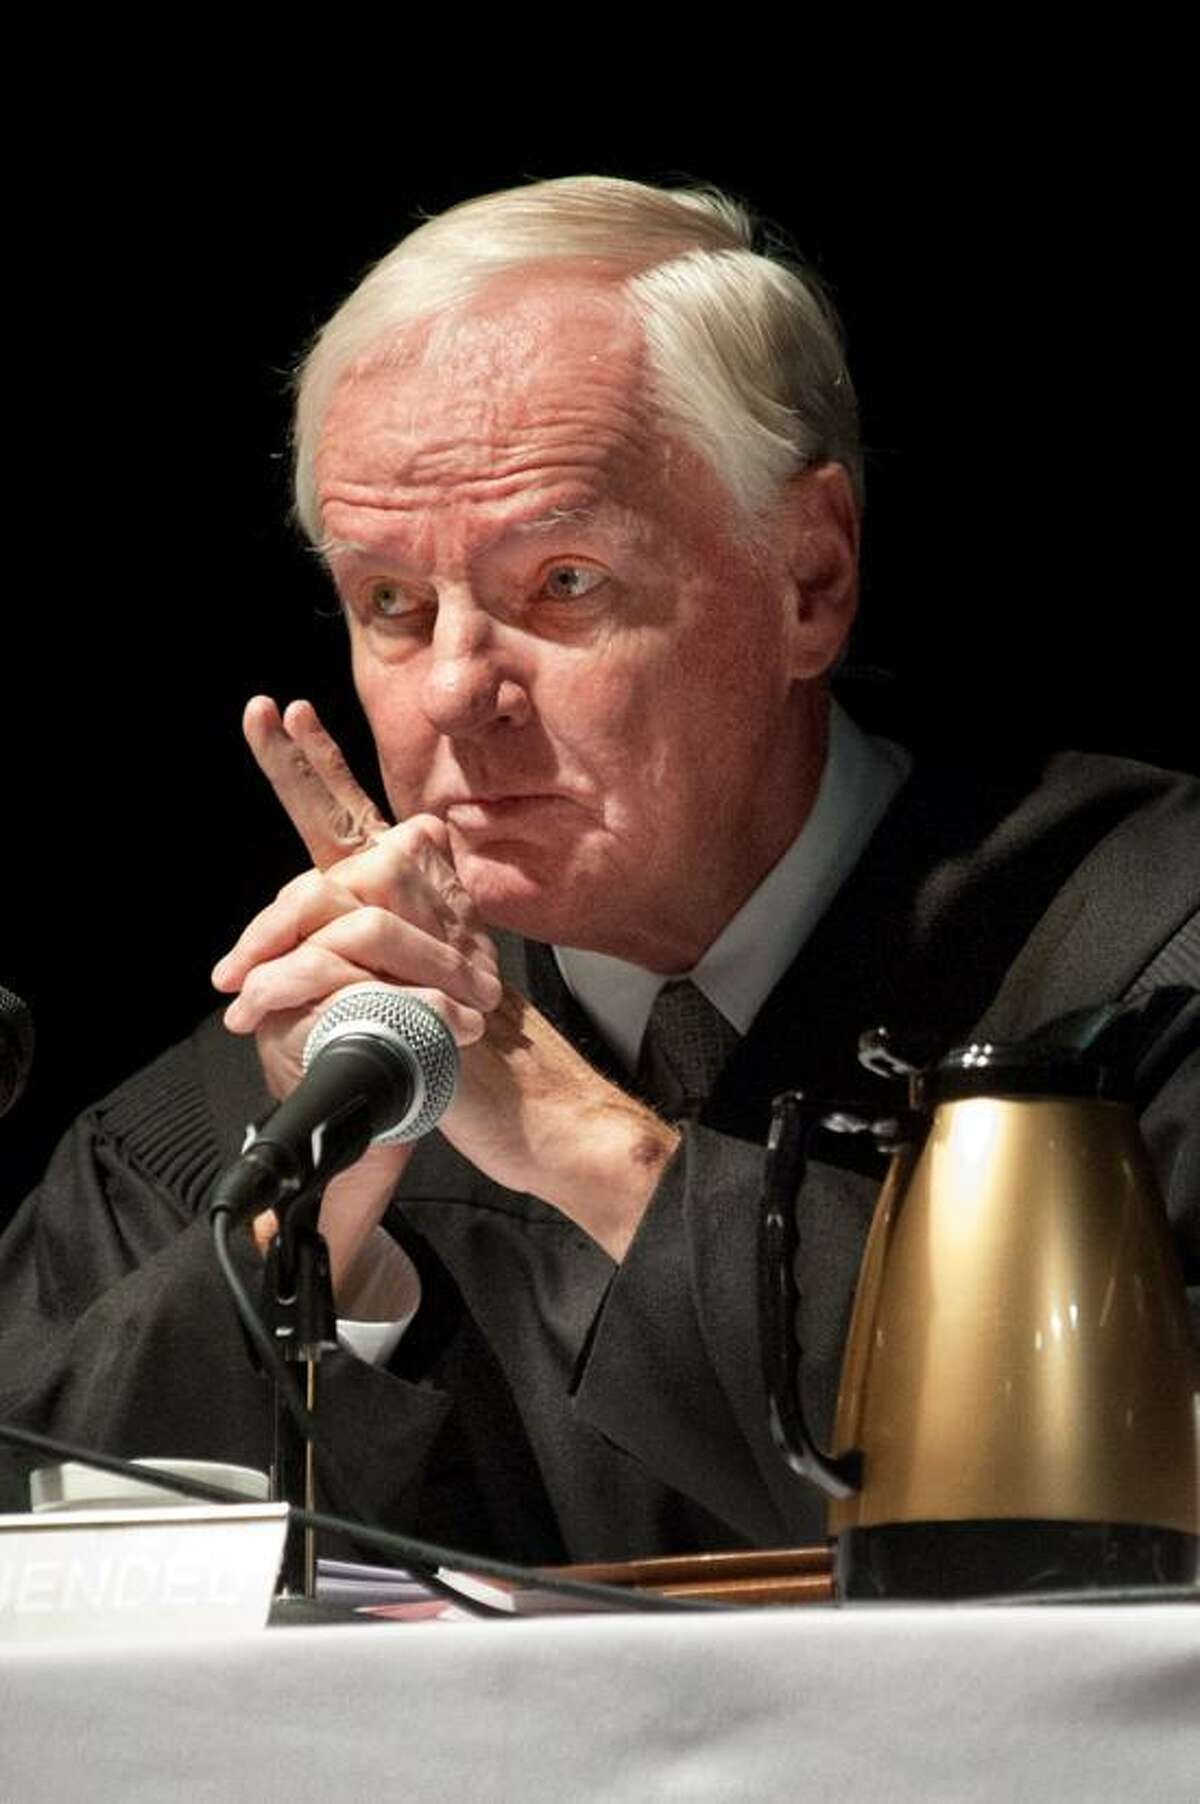 Appellate Court Judges F. Herbert Gruendel who organized the courts visit asks a question of one of the attorneys participating in The Connecticut Appellate Courts session that was held in the Branford High School Auditorium with hundreds of students in attendance Thursday, Octobet 18,2012. vm Williams